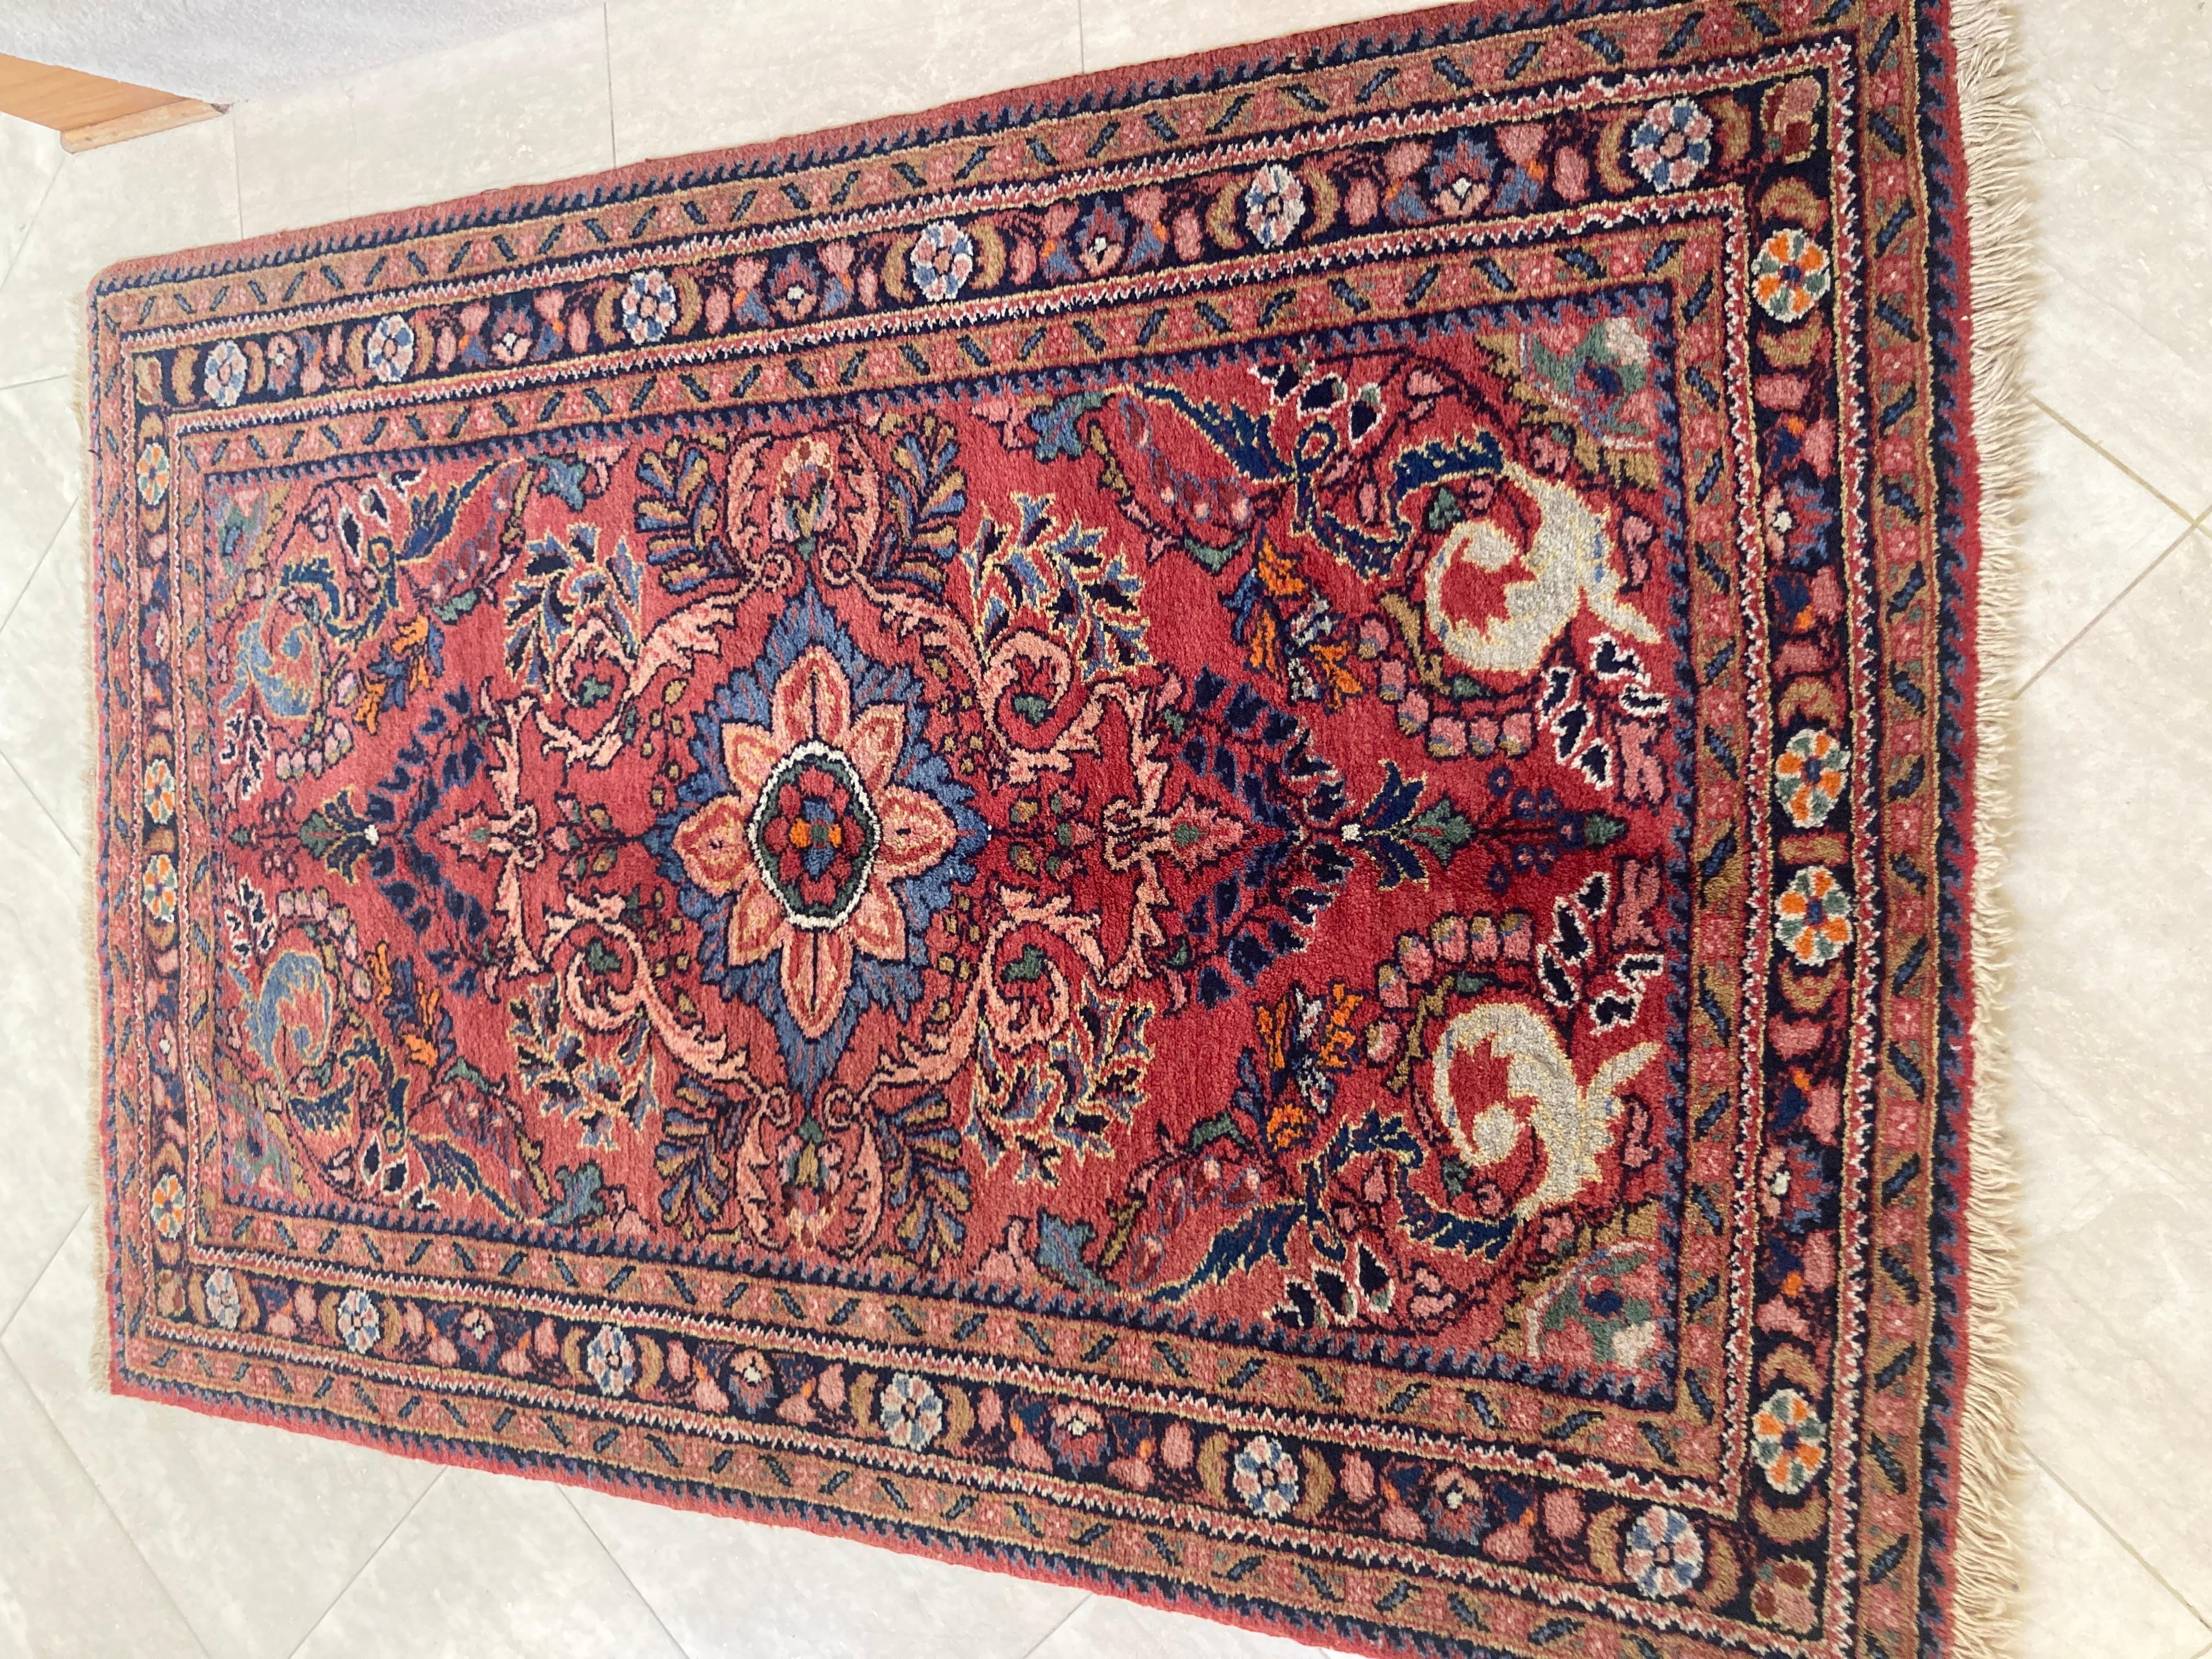 Small hand-knotted rug from Eastern Turkey,
Antique oriental accent rug, carpet or mat.
Vintage Turkish rug with rare colors. 
This hand-knotted rug has an unusual green field with blue and red traditional motives.
The rug is completely made of